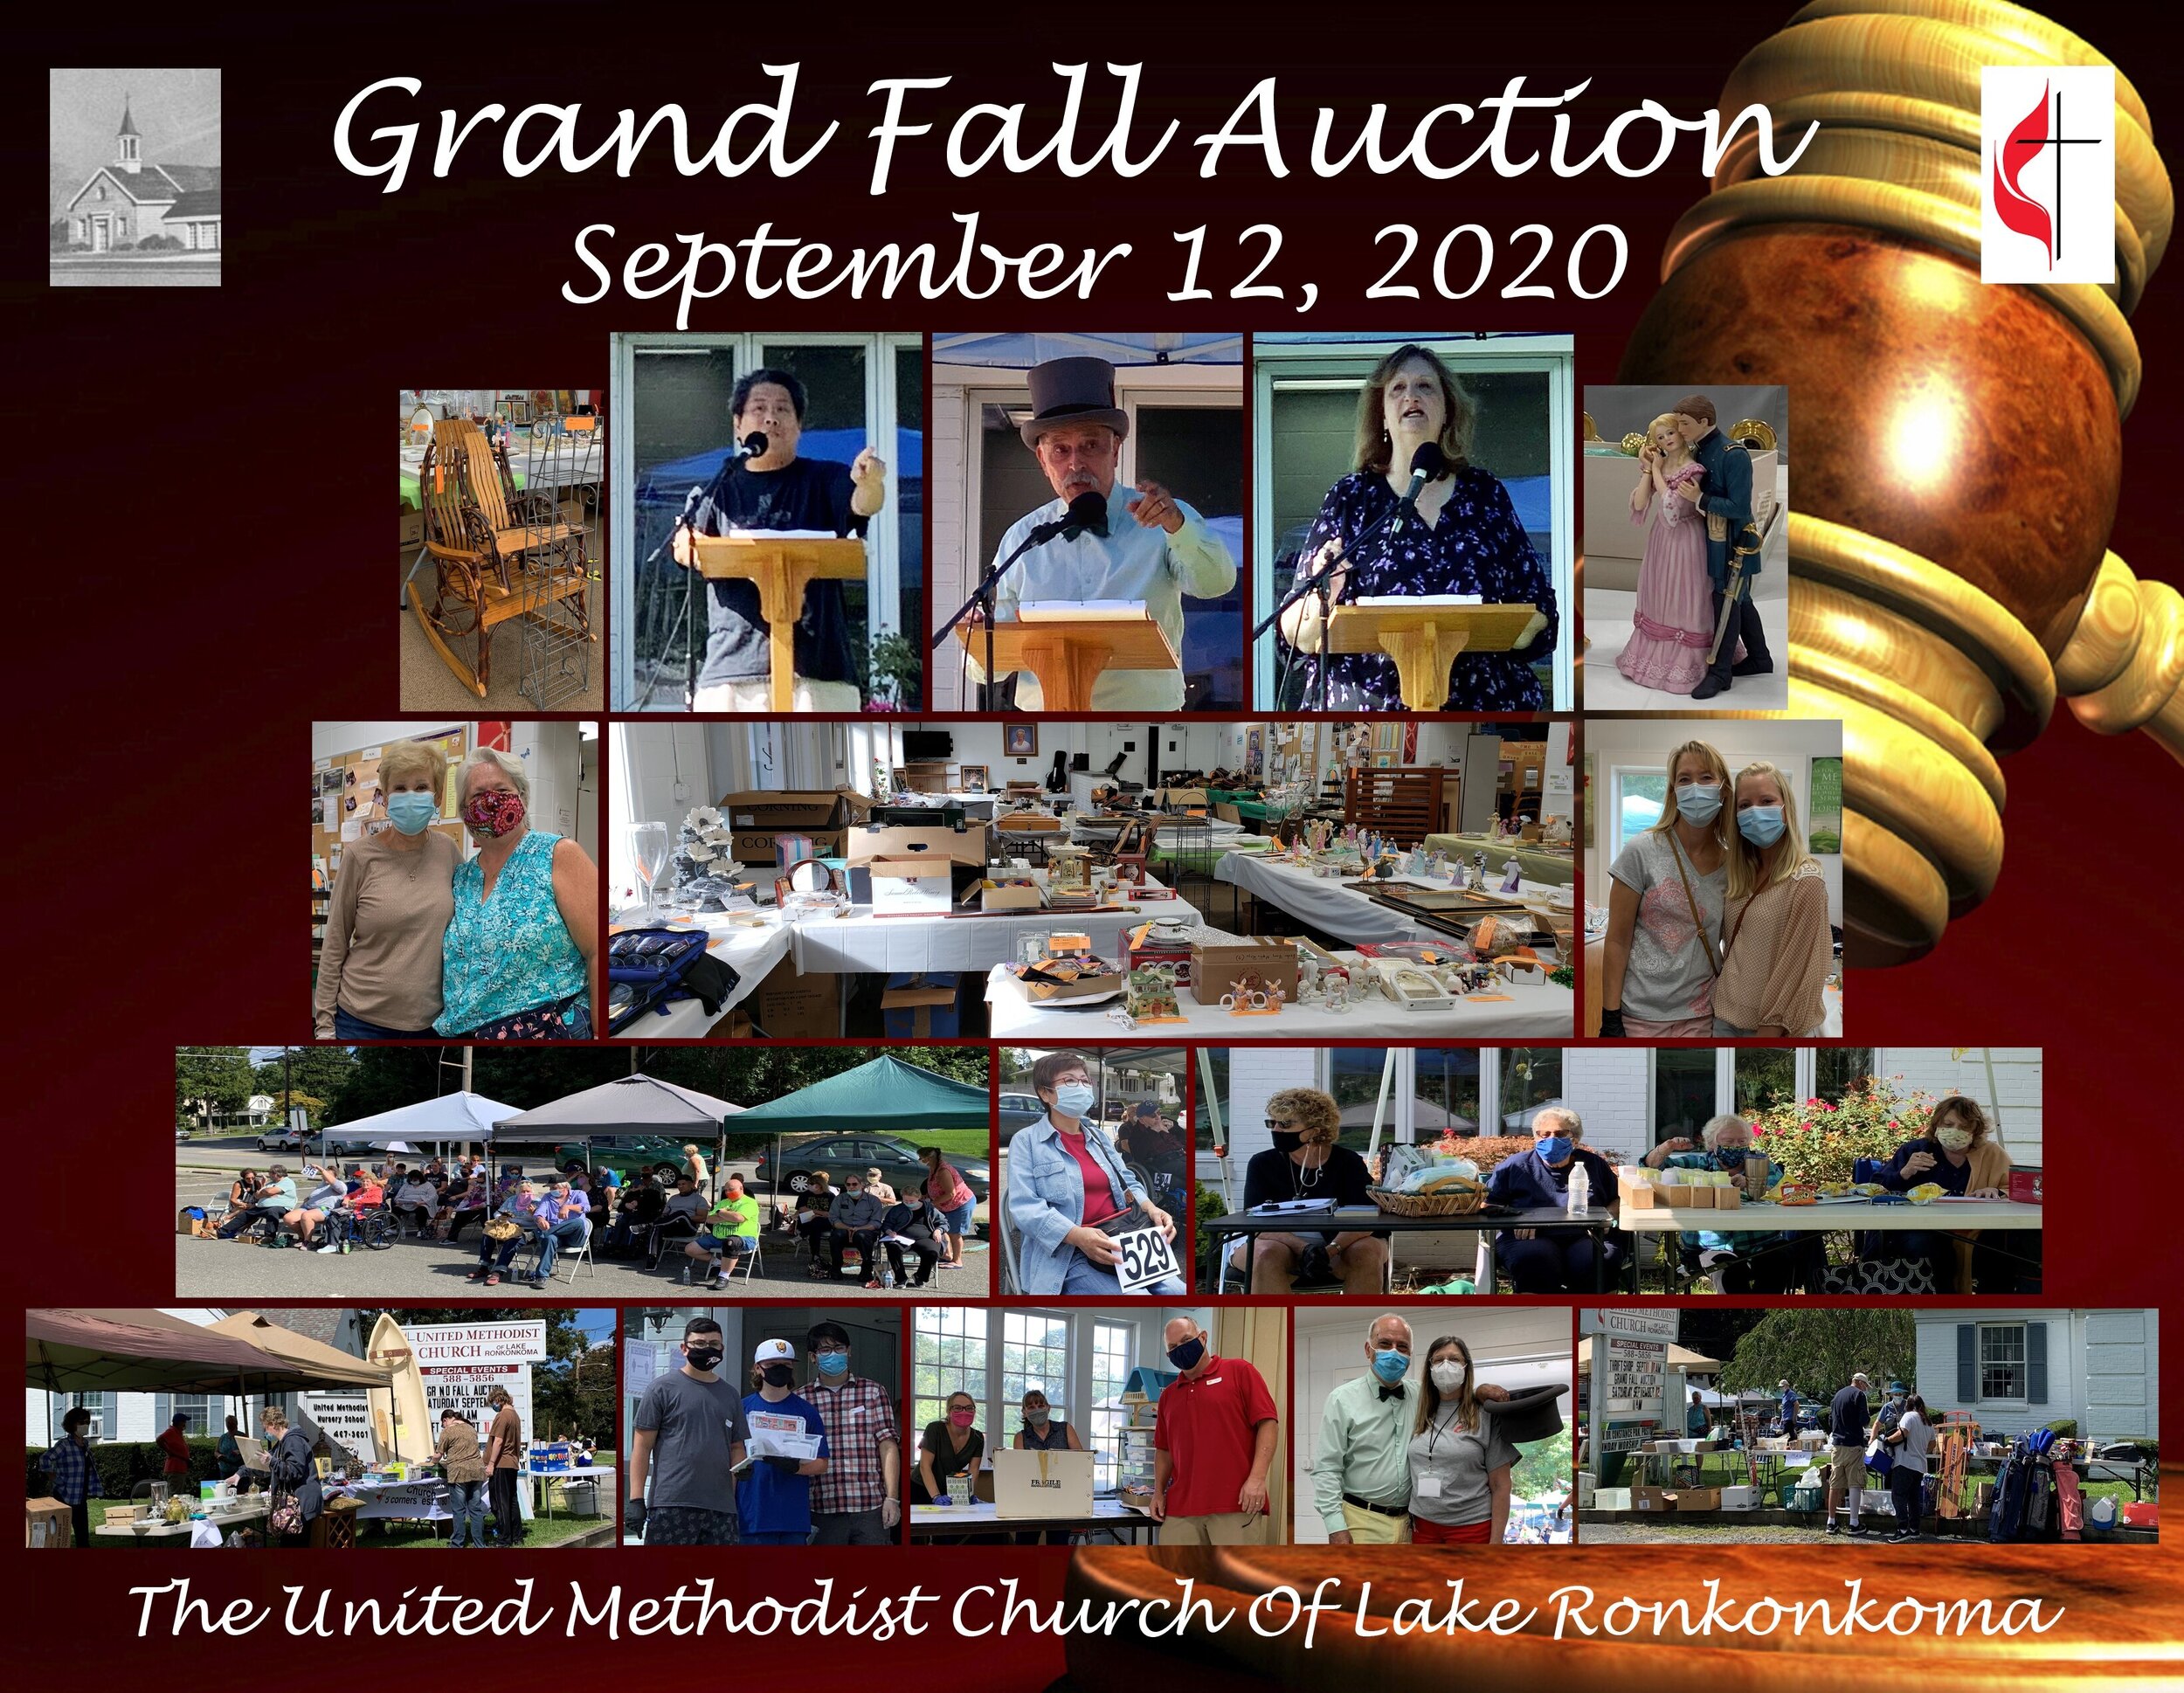 12-09-12-2020 Grand Fall Auction Poster.jpg